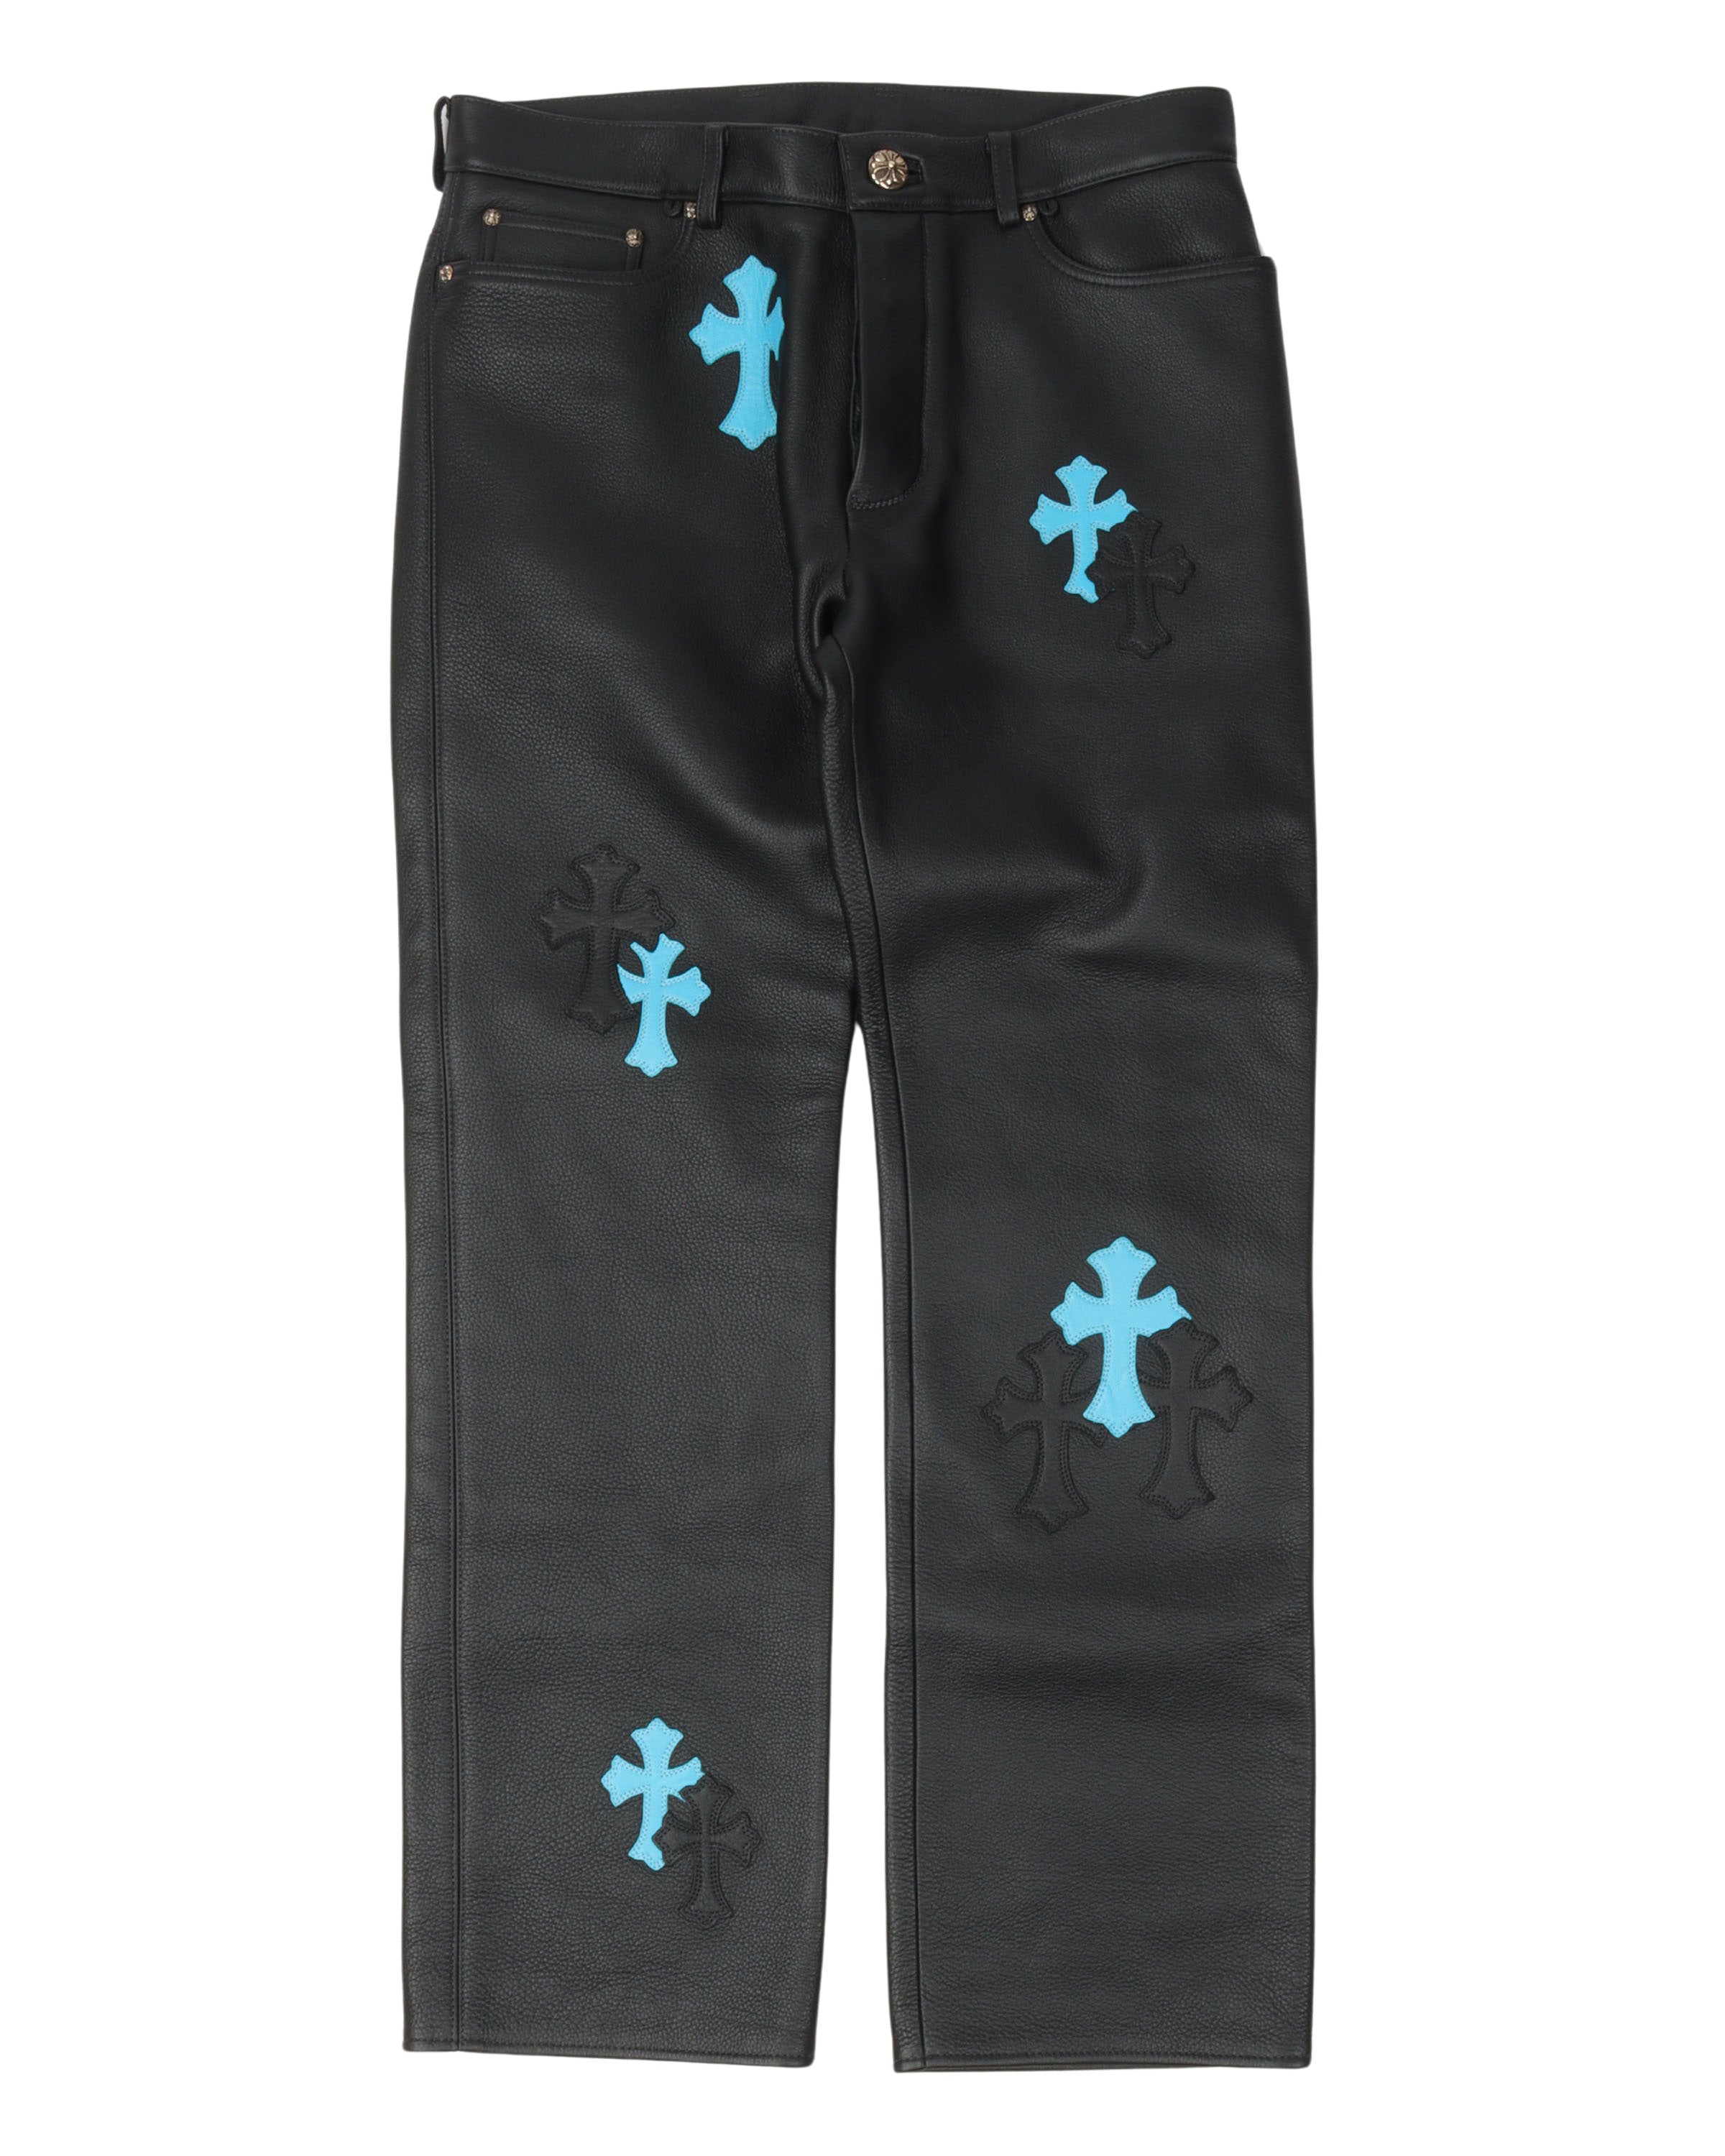 Chrome Hearts Cross Patch Leather Pants